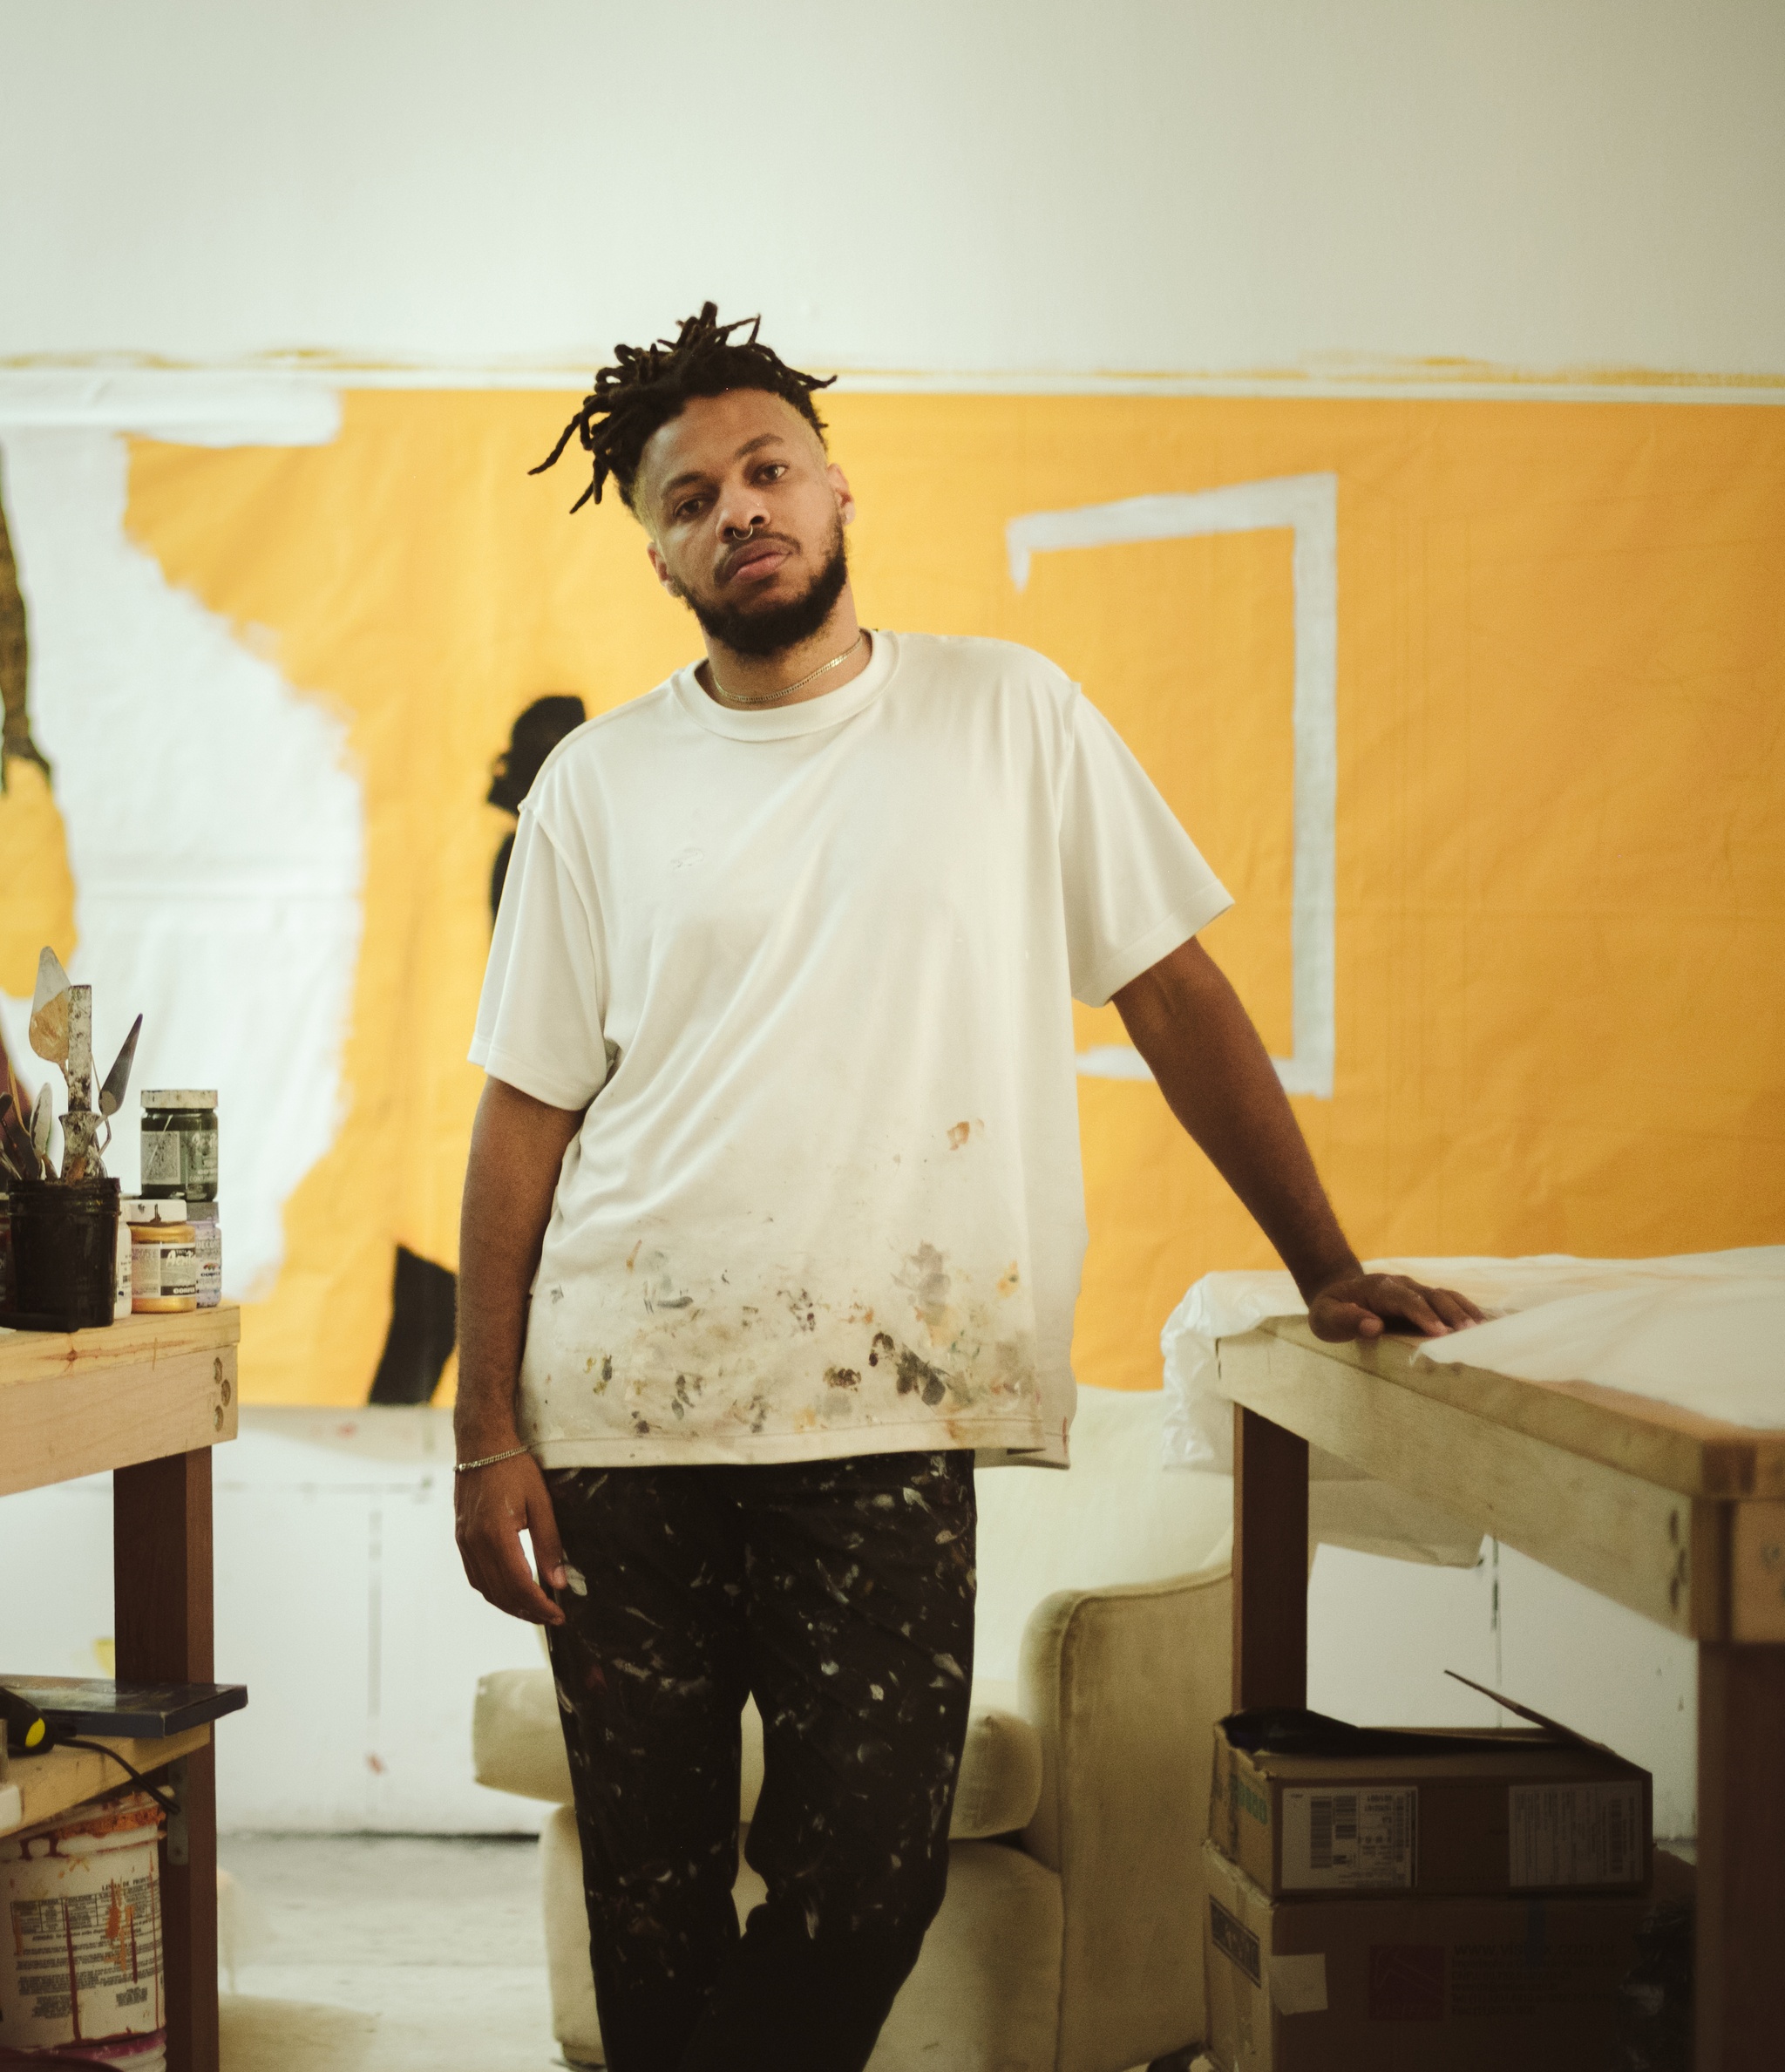 A portrait of artist Maxwell Alexandre standing in his studio with a yellow brown painting on the wall behind him. Maxwell is a Black Brazilian man with a beard. He wears a white t-shirt that is dirty with paint at the bottom hem.